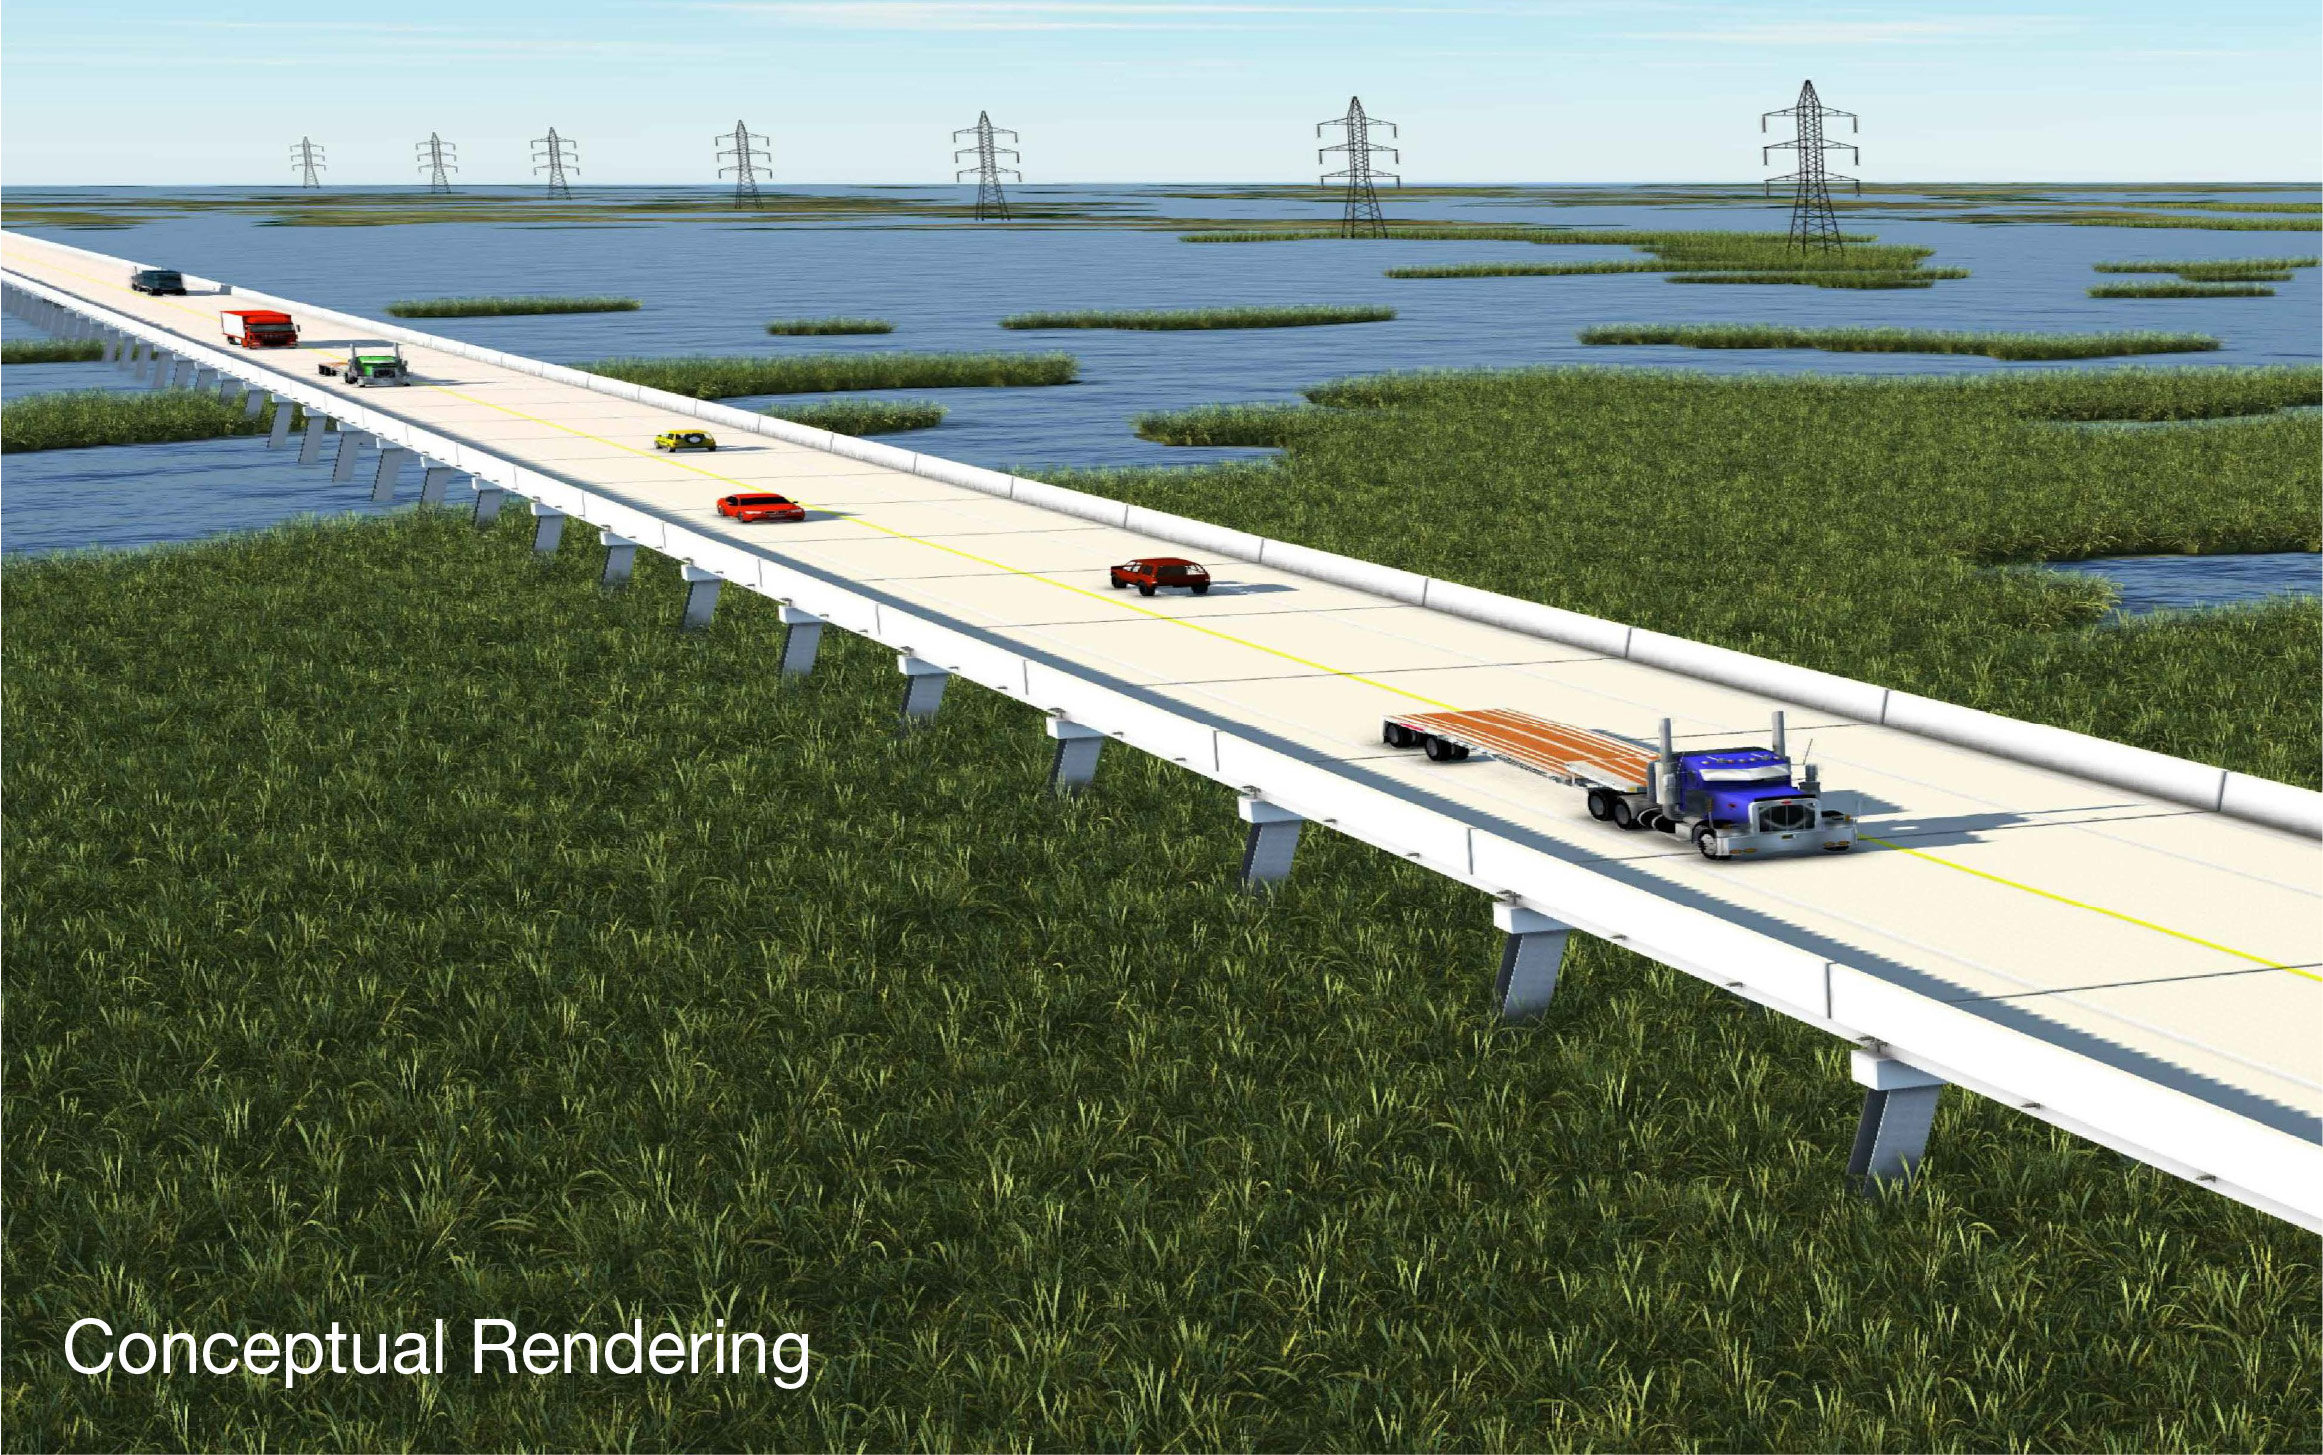 Conceptual rendering of the potential elevated roadway that would connect Lower St. Bernard to the interstate system.